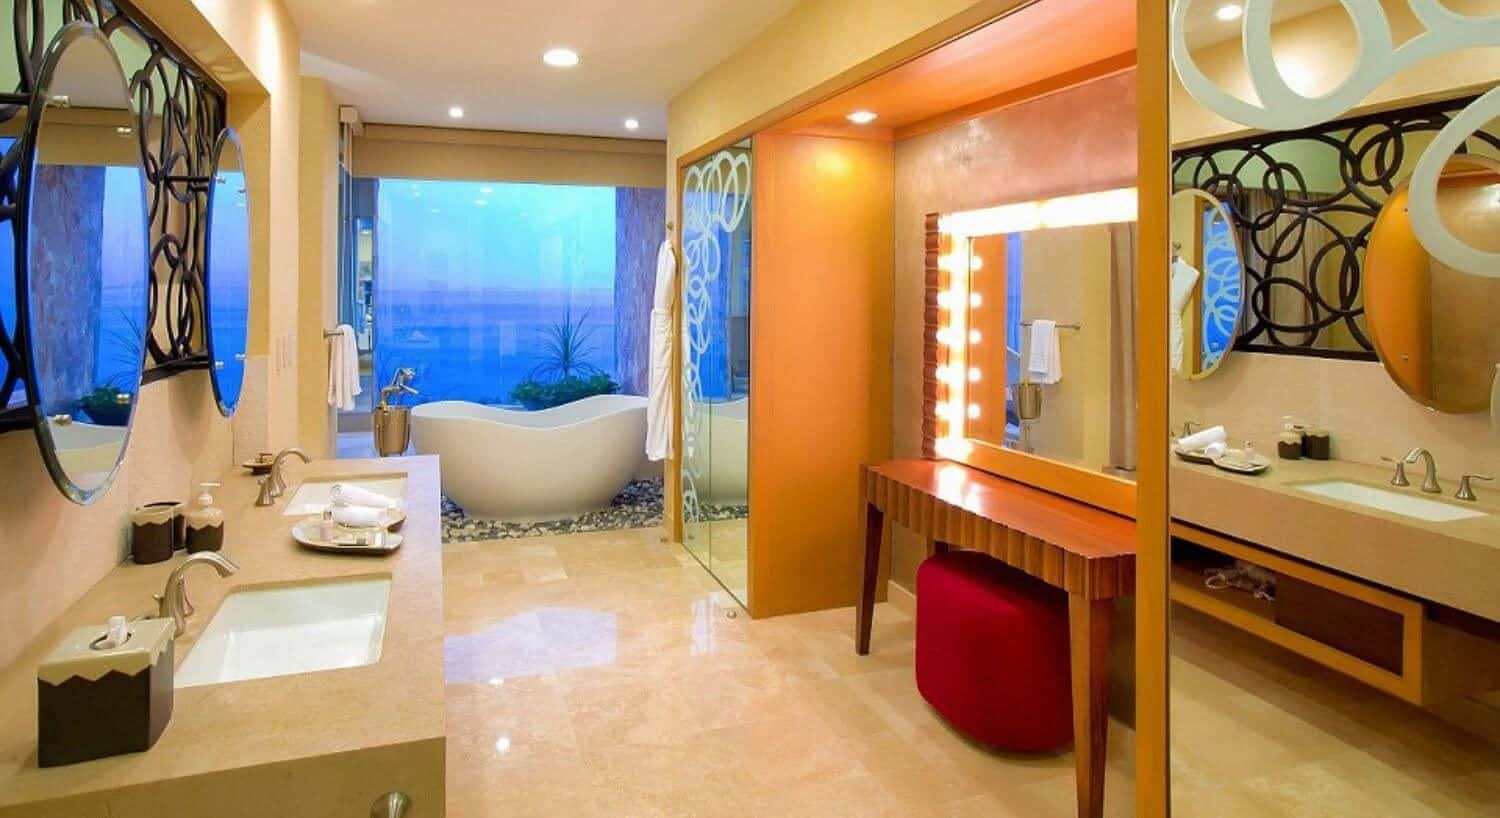 A bathroom with double sinks in a marble countertop, lit magnifying mirror, and a vanity with lit mirror and red ottoman across from the sinks. A teardrop bathtub set in rocks with floor to ceiling glass windows showcasing ocean views.